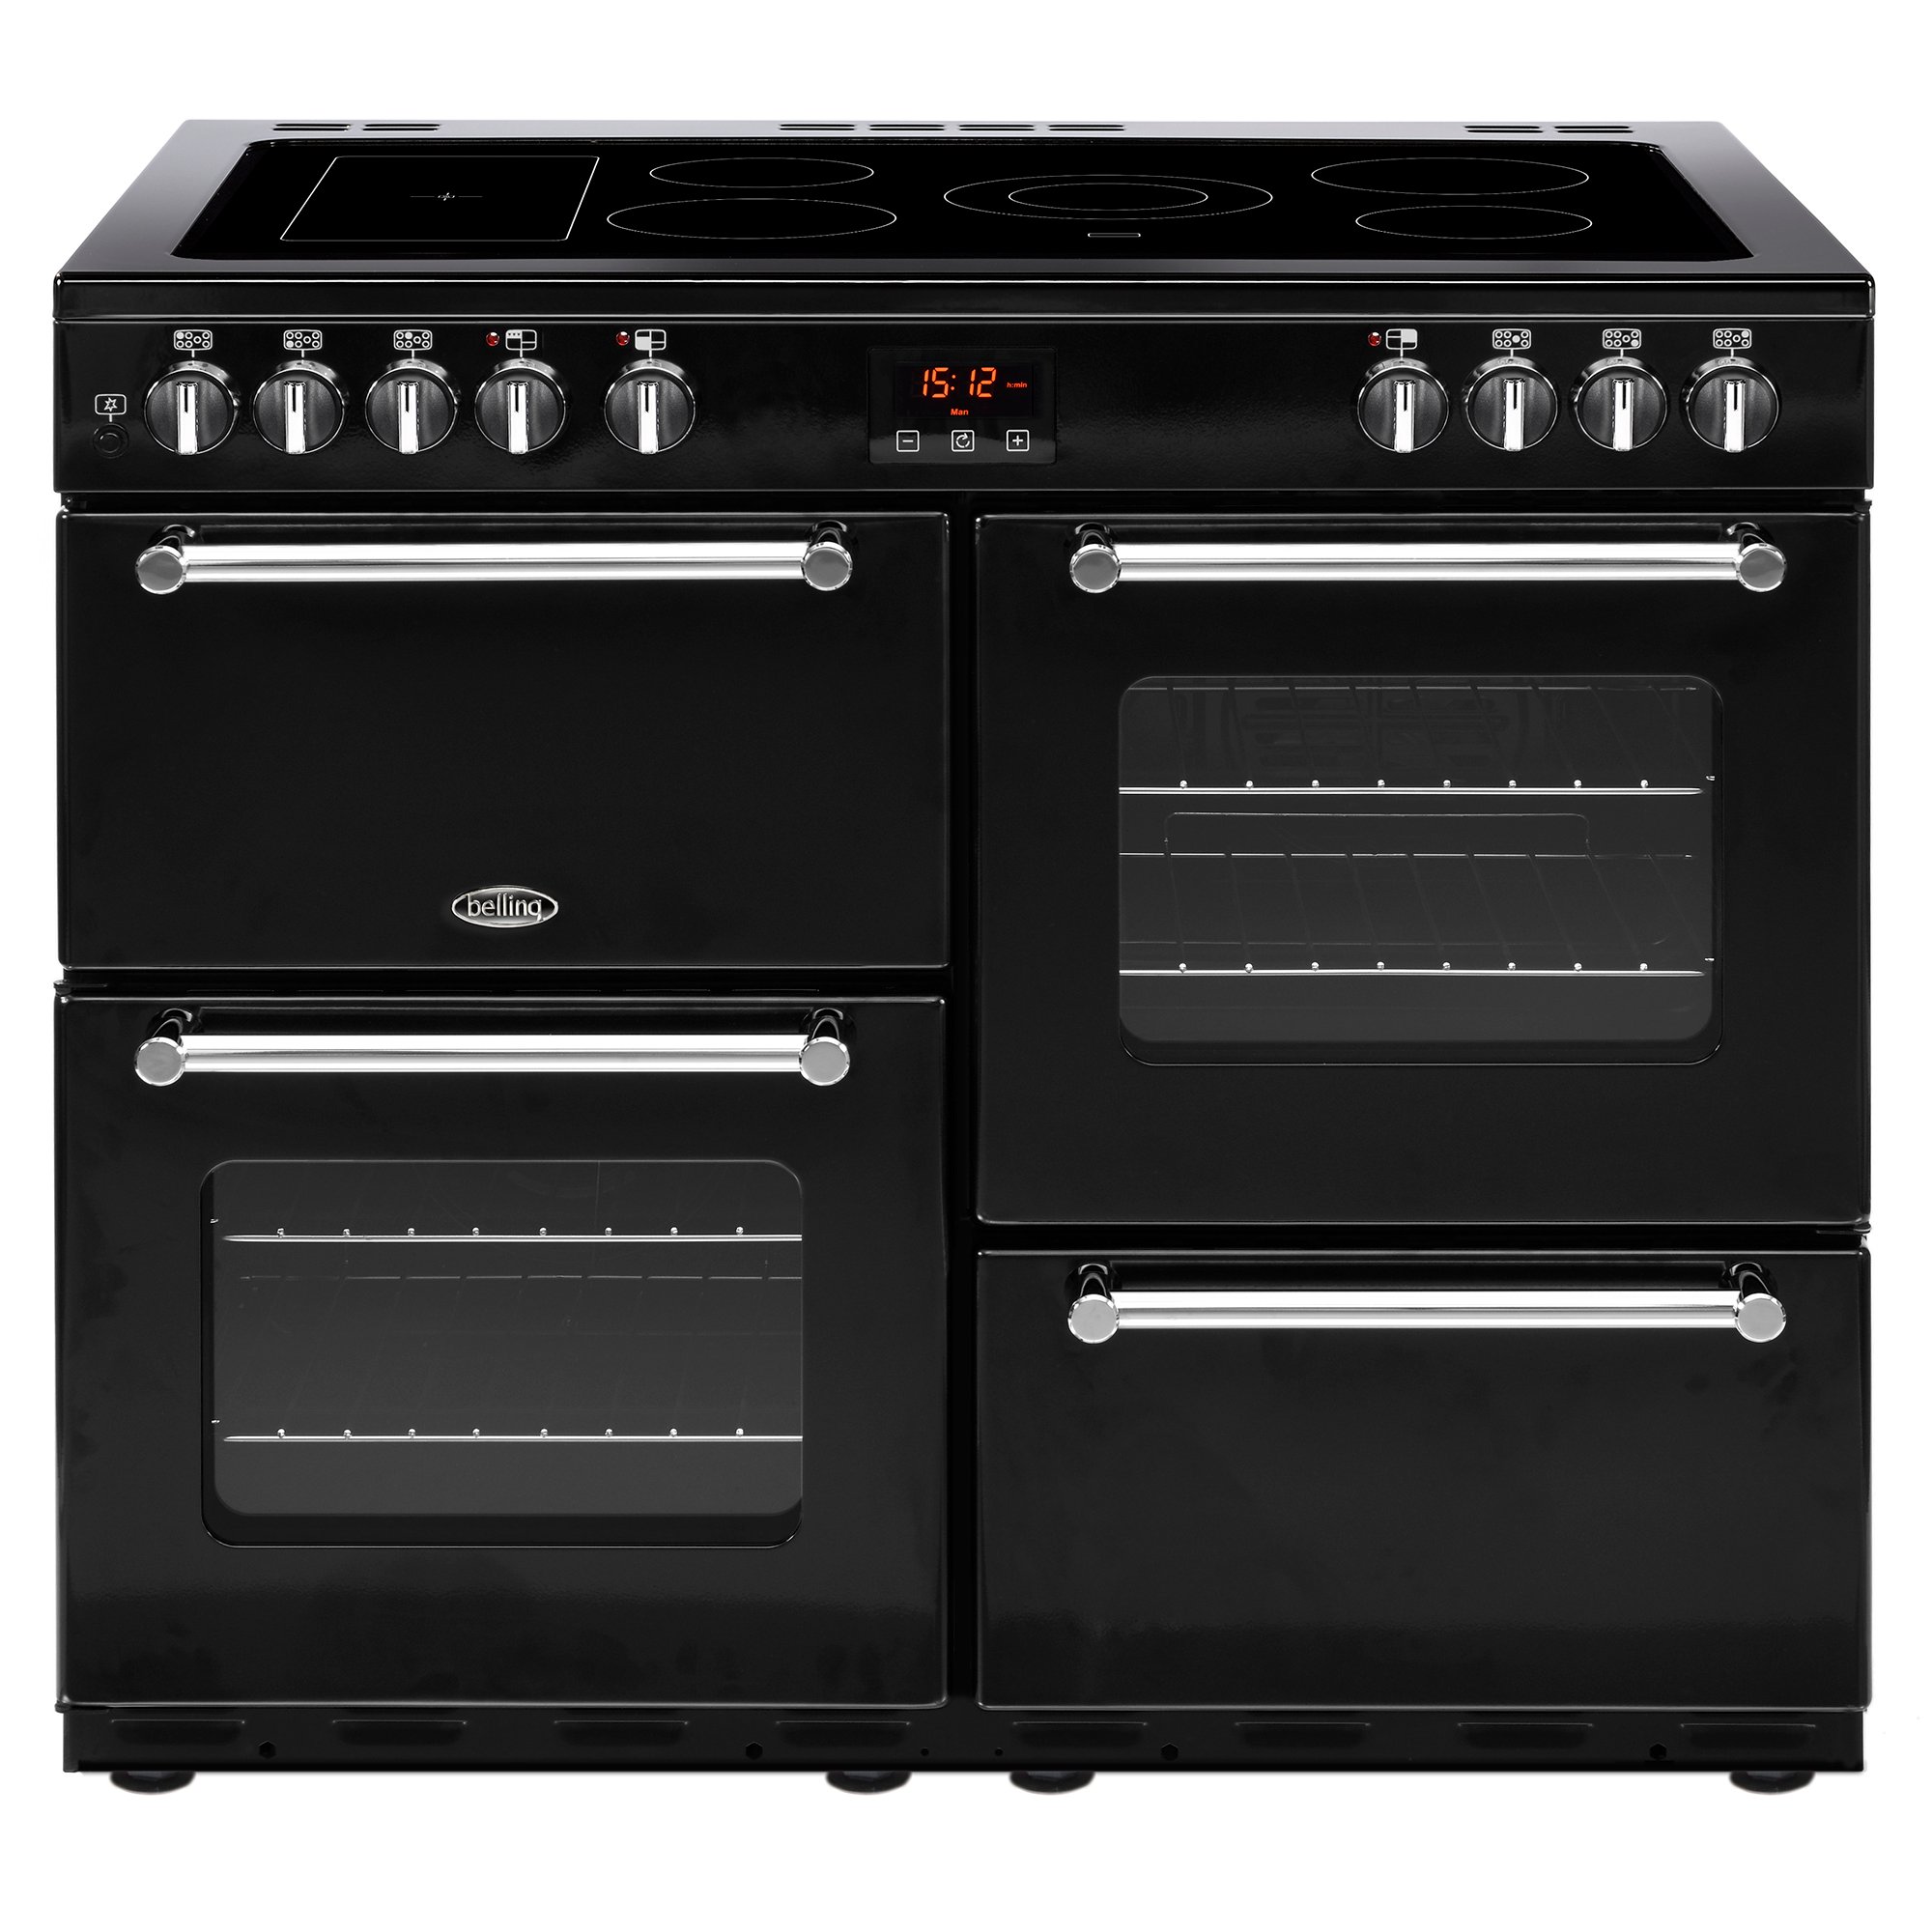 100cm electric range cooker with 5 zone ceramic hob and additional warming zone, variable rate electric grill, 2 conventional ovens and a main fanned oven.